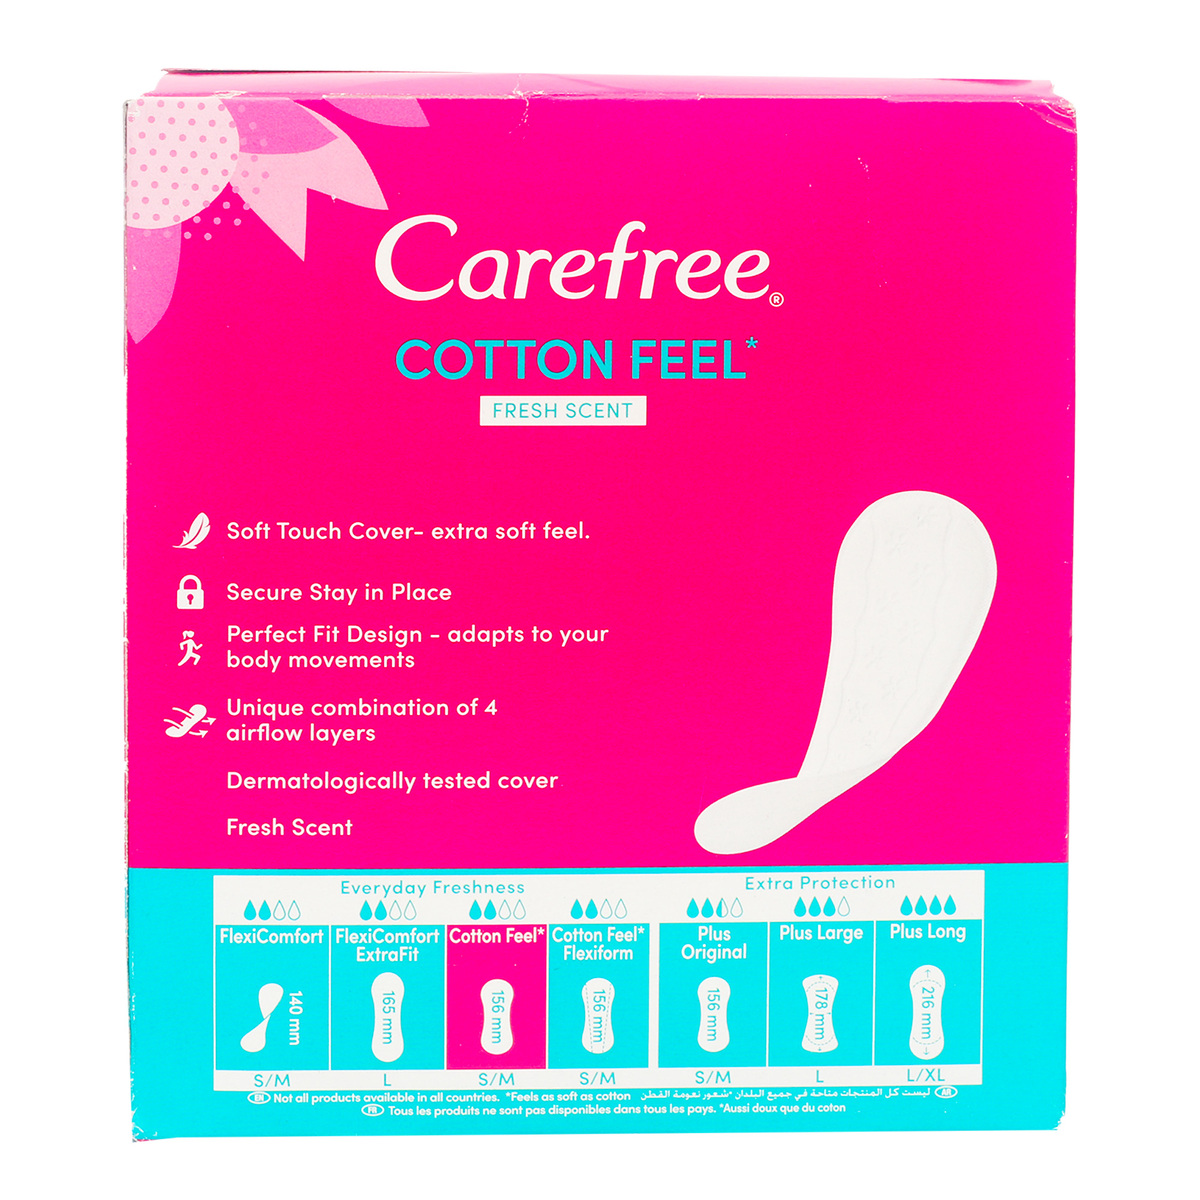 Carefree Panty Liners Cotton Feel 76 pcs Online at Best Price, Sanpro Panty  Liners